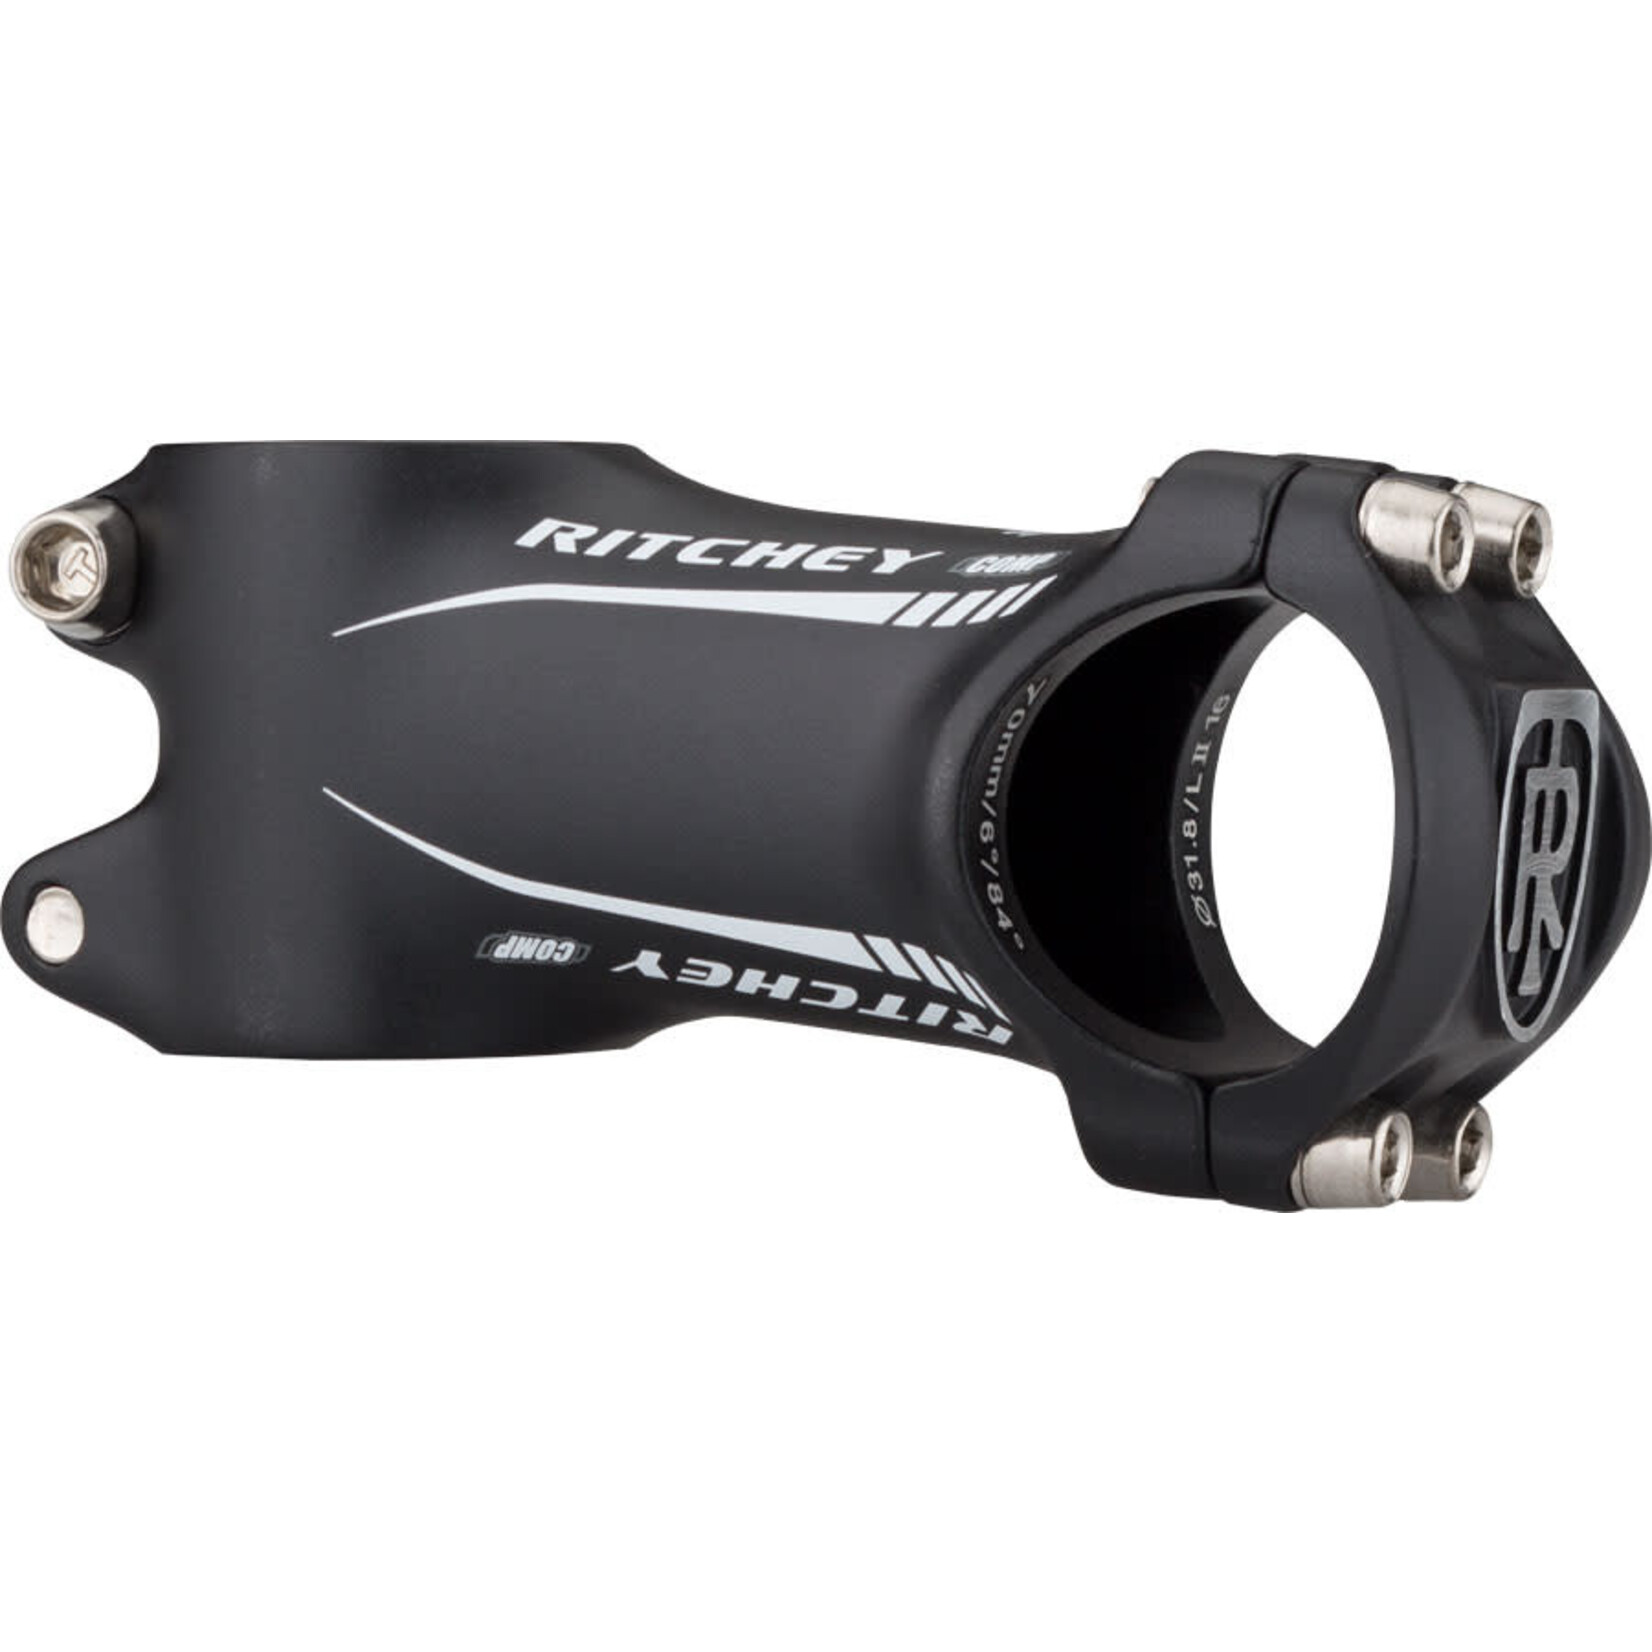 Ritchey Ritchey Comp Stem - 90 mm, 25.8/26.0 Clamp, +/-6, 1 1/8", Alloy, Black